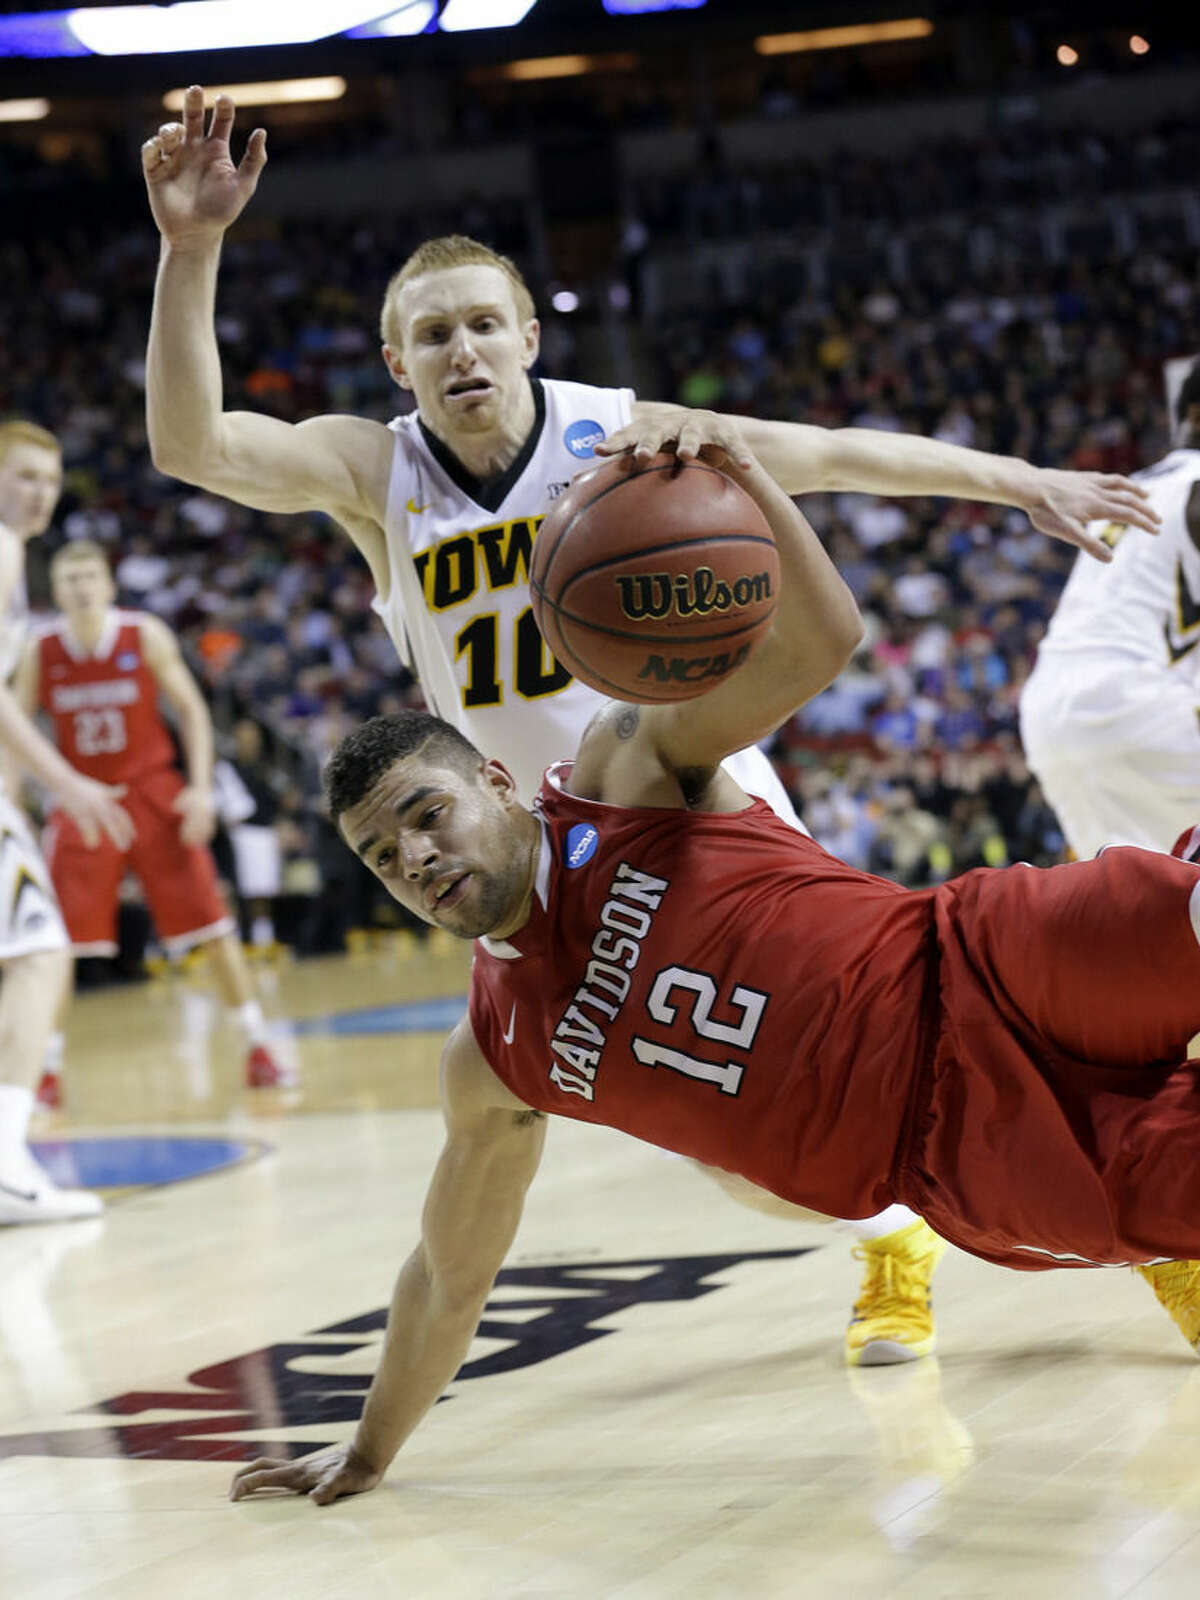 Davidson's Jack Gibbs (12) continues to dribble as he tumbles to the floor in front of Iowa's Mike Gesell during the second half of an NCAA tournament college basketball game in the Round of 64 in Seattle, Friday, March 20, 2015. (AP Photo/Elaine Thompson)